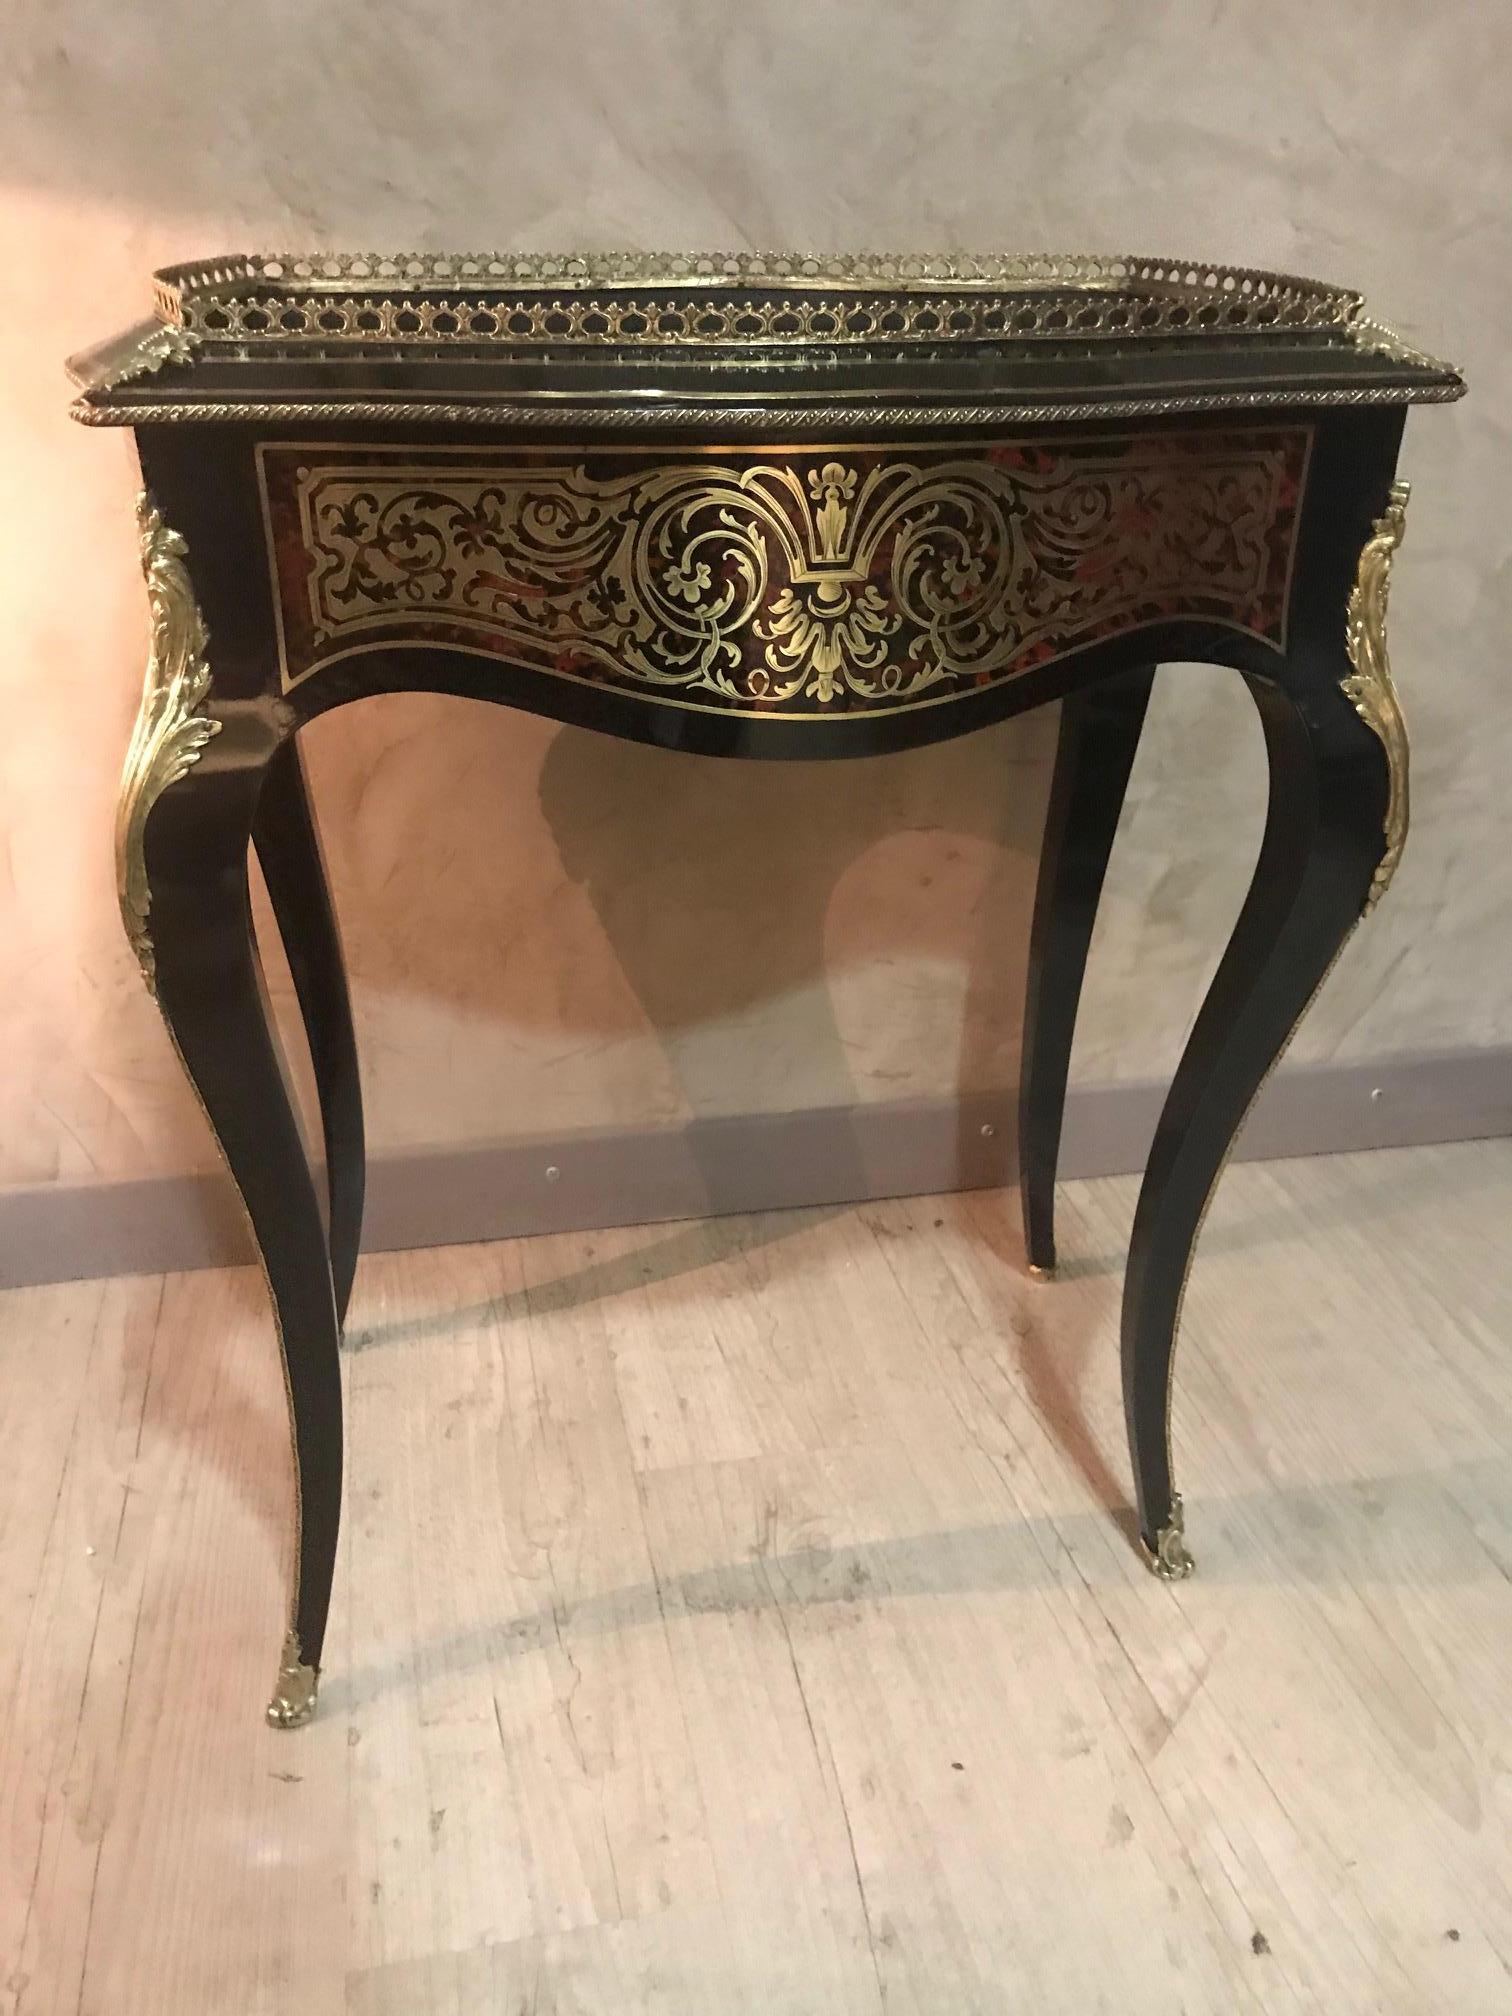 Beautiful and rare 19th century French Naopelon III period mahogany and gilded brass jardinière entirely restored by a good French cabinet maker.
gilded brass gallery and bronze fittings. Real craft work of brass.
The jardinière has been restored,